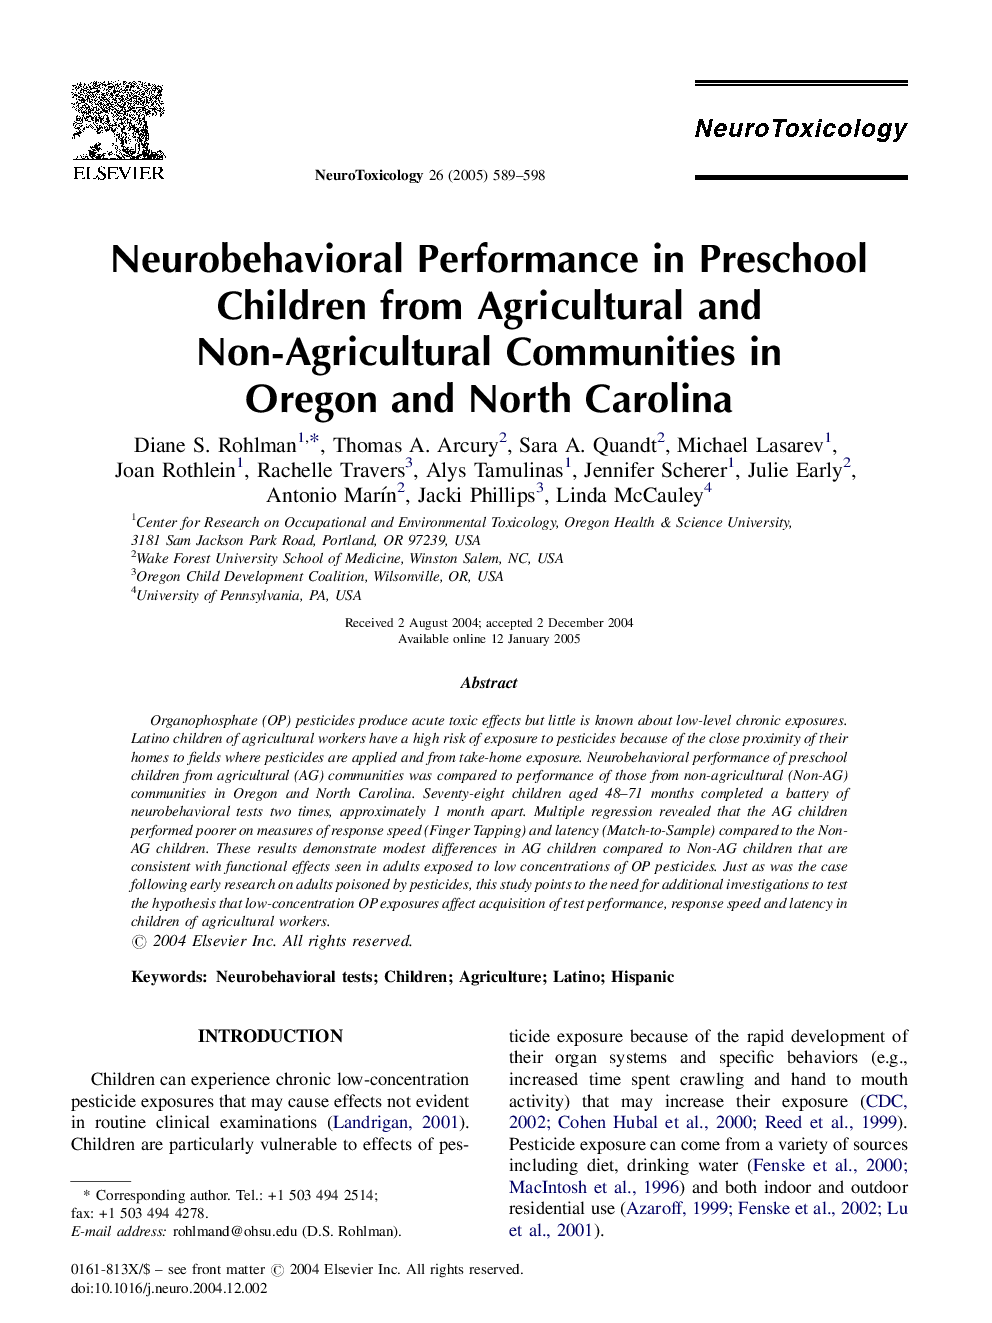 Neurobehavioral Performance in Preschool Children from Agricultural and Non-Agricultural Communities in Oregon and North Carolina